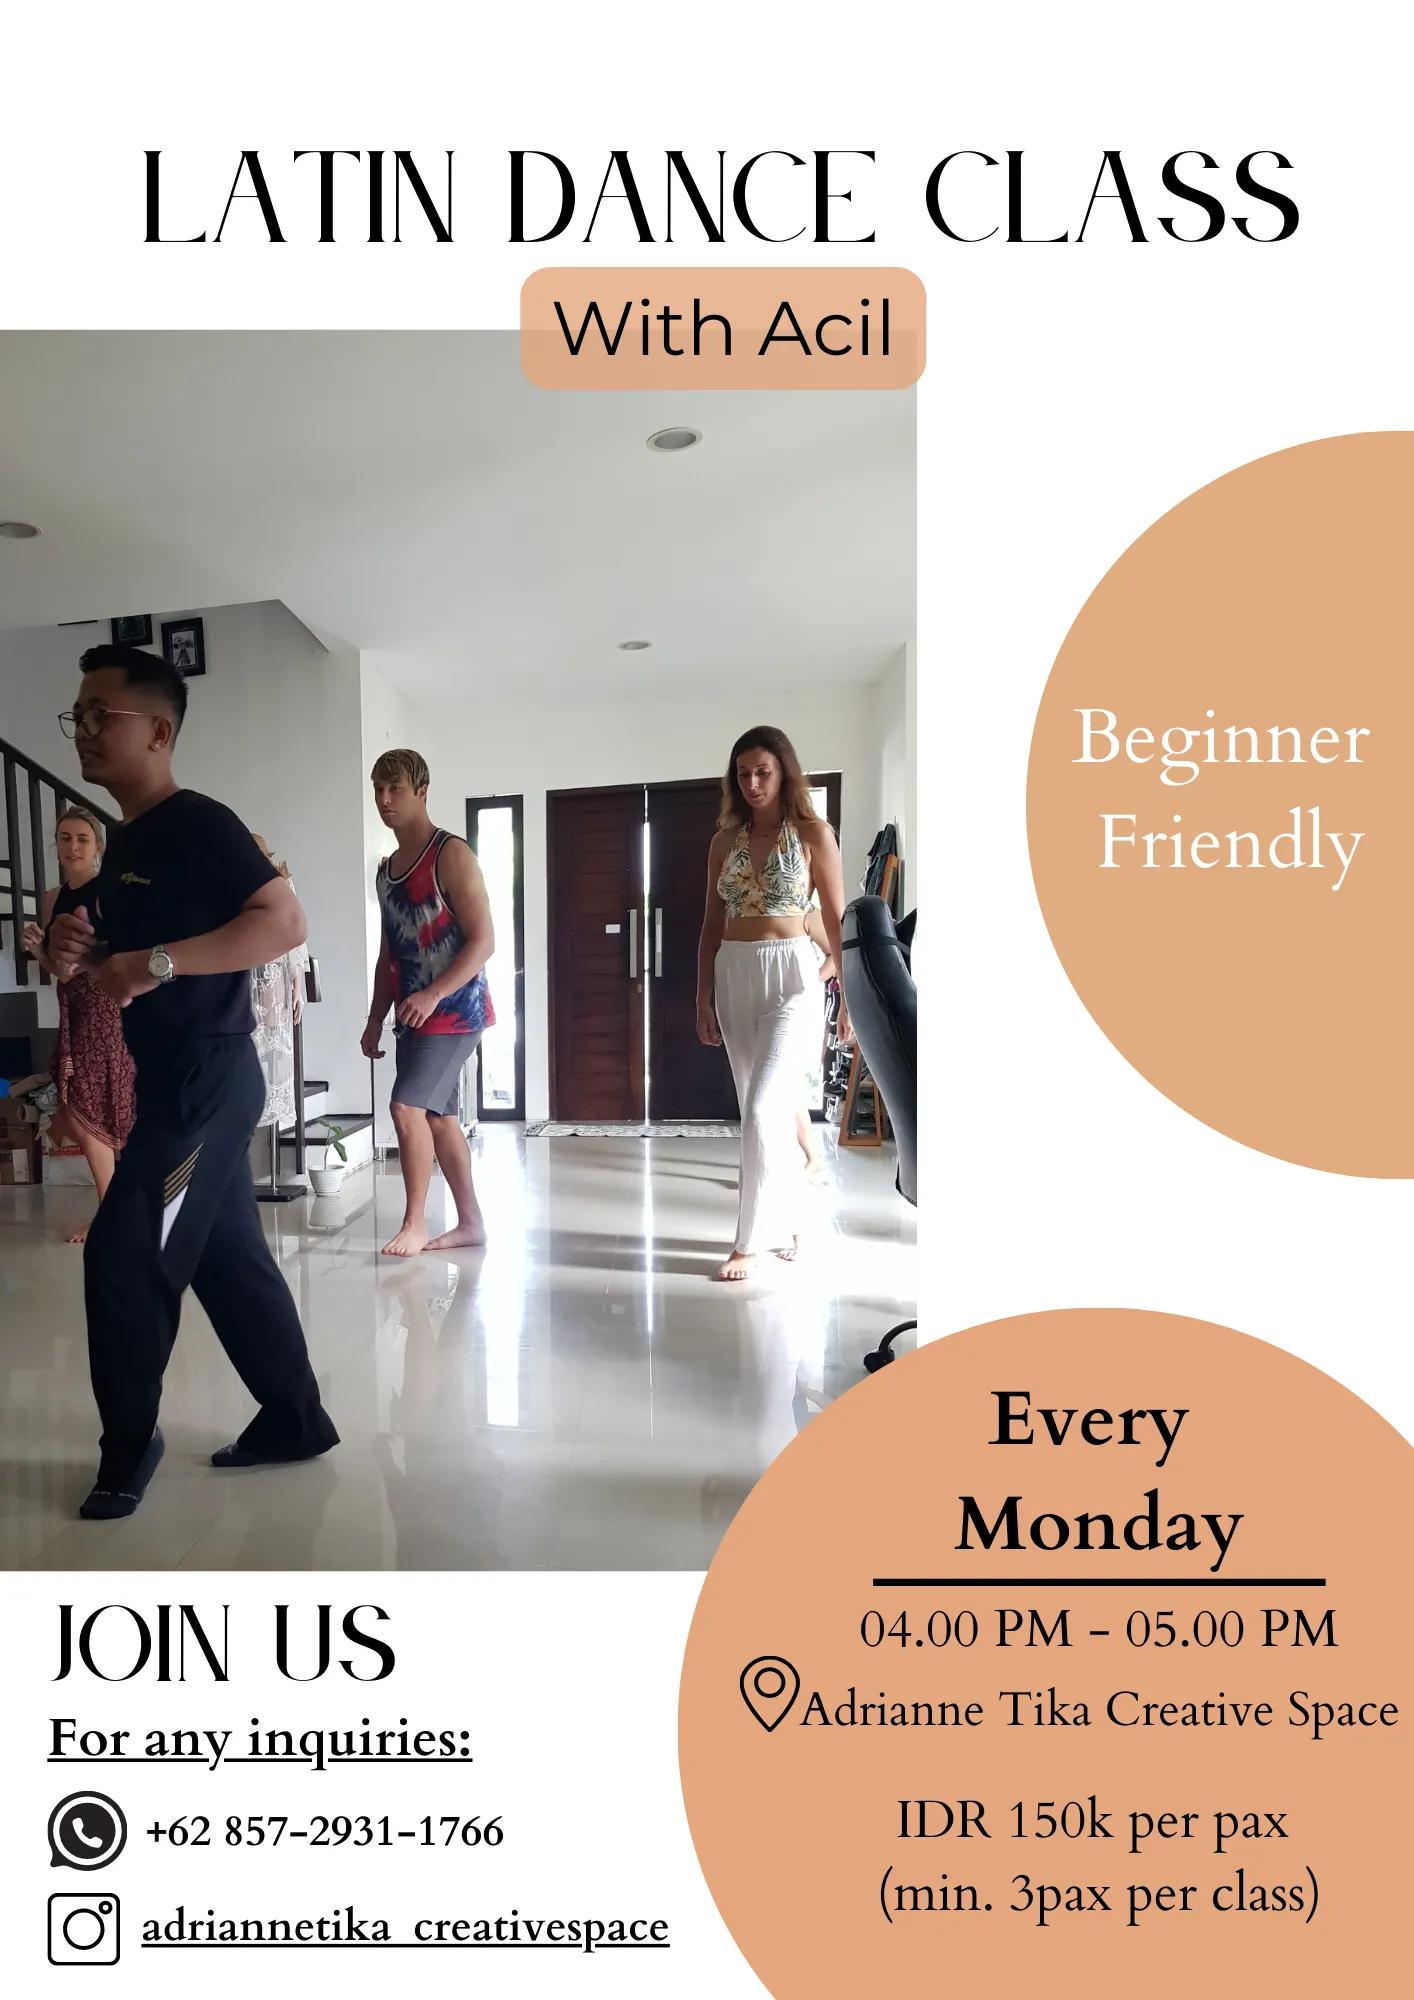 Event at Adrianne Tika Creative Space every Monday 2024: Latin Dance Class